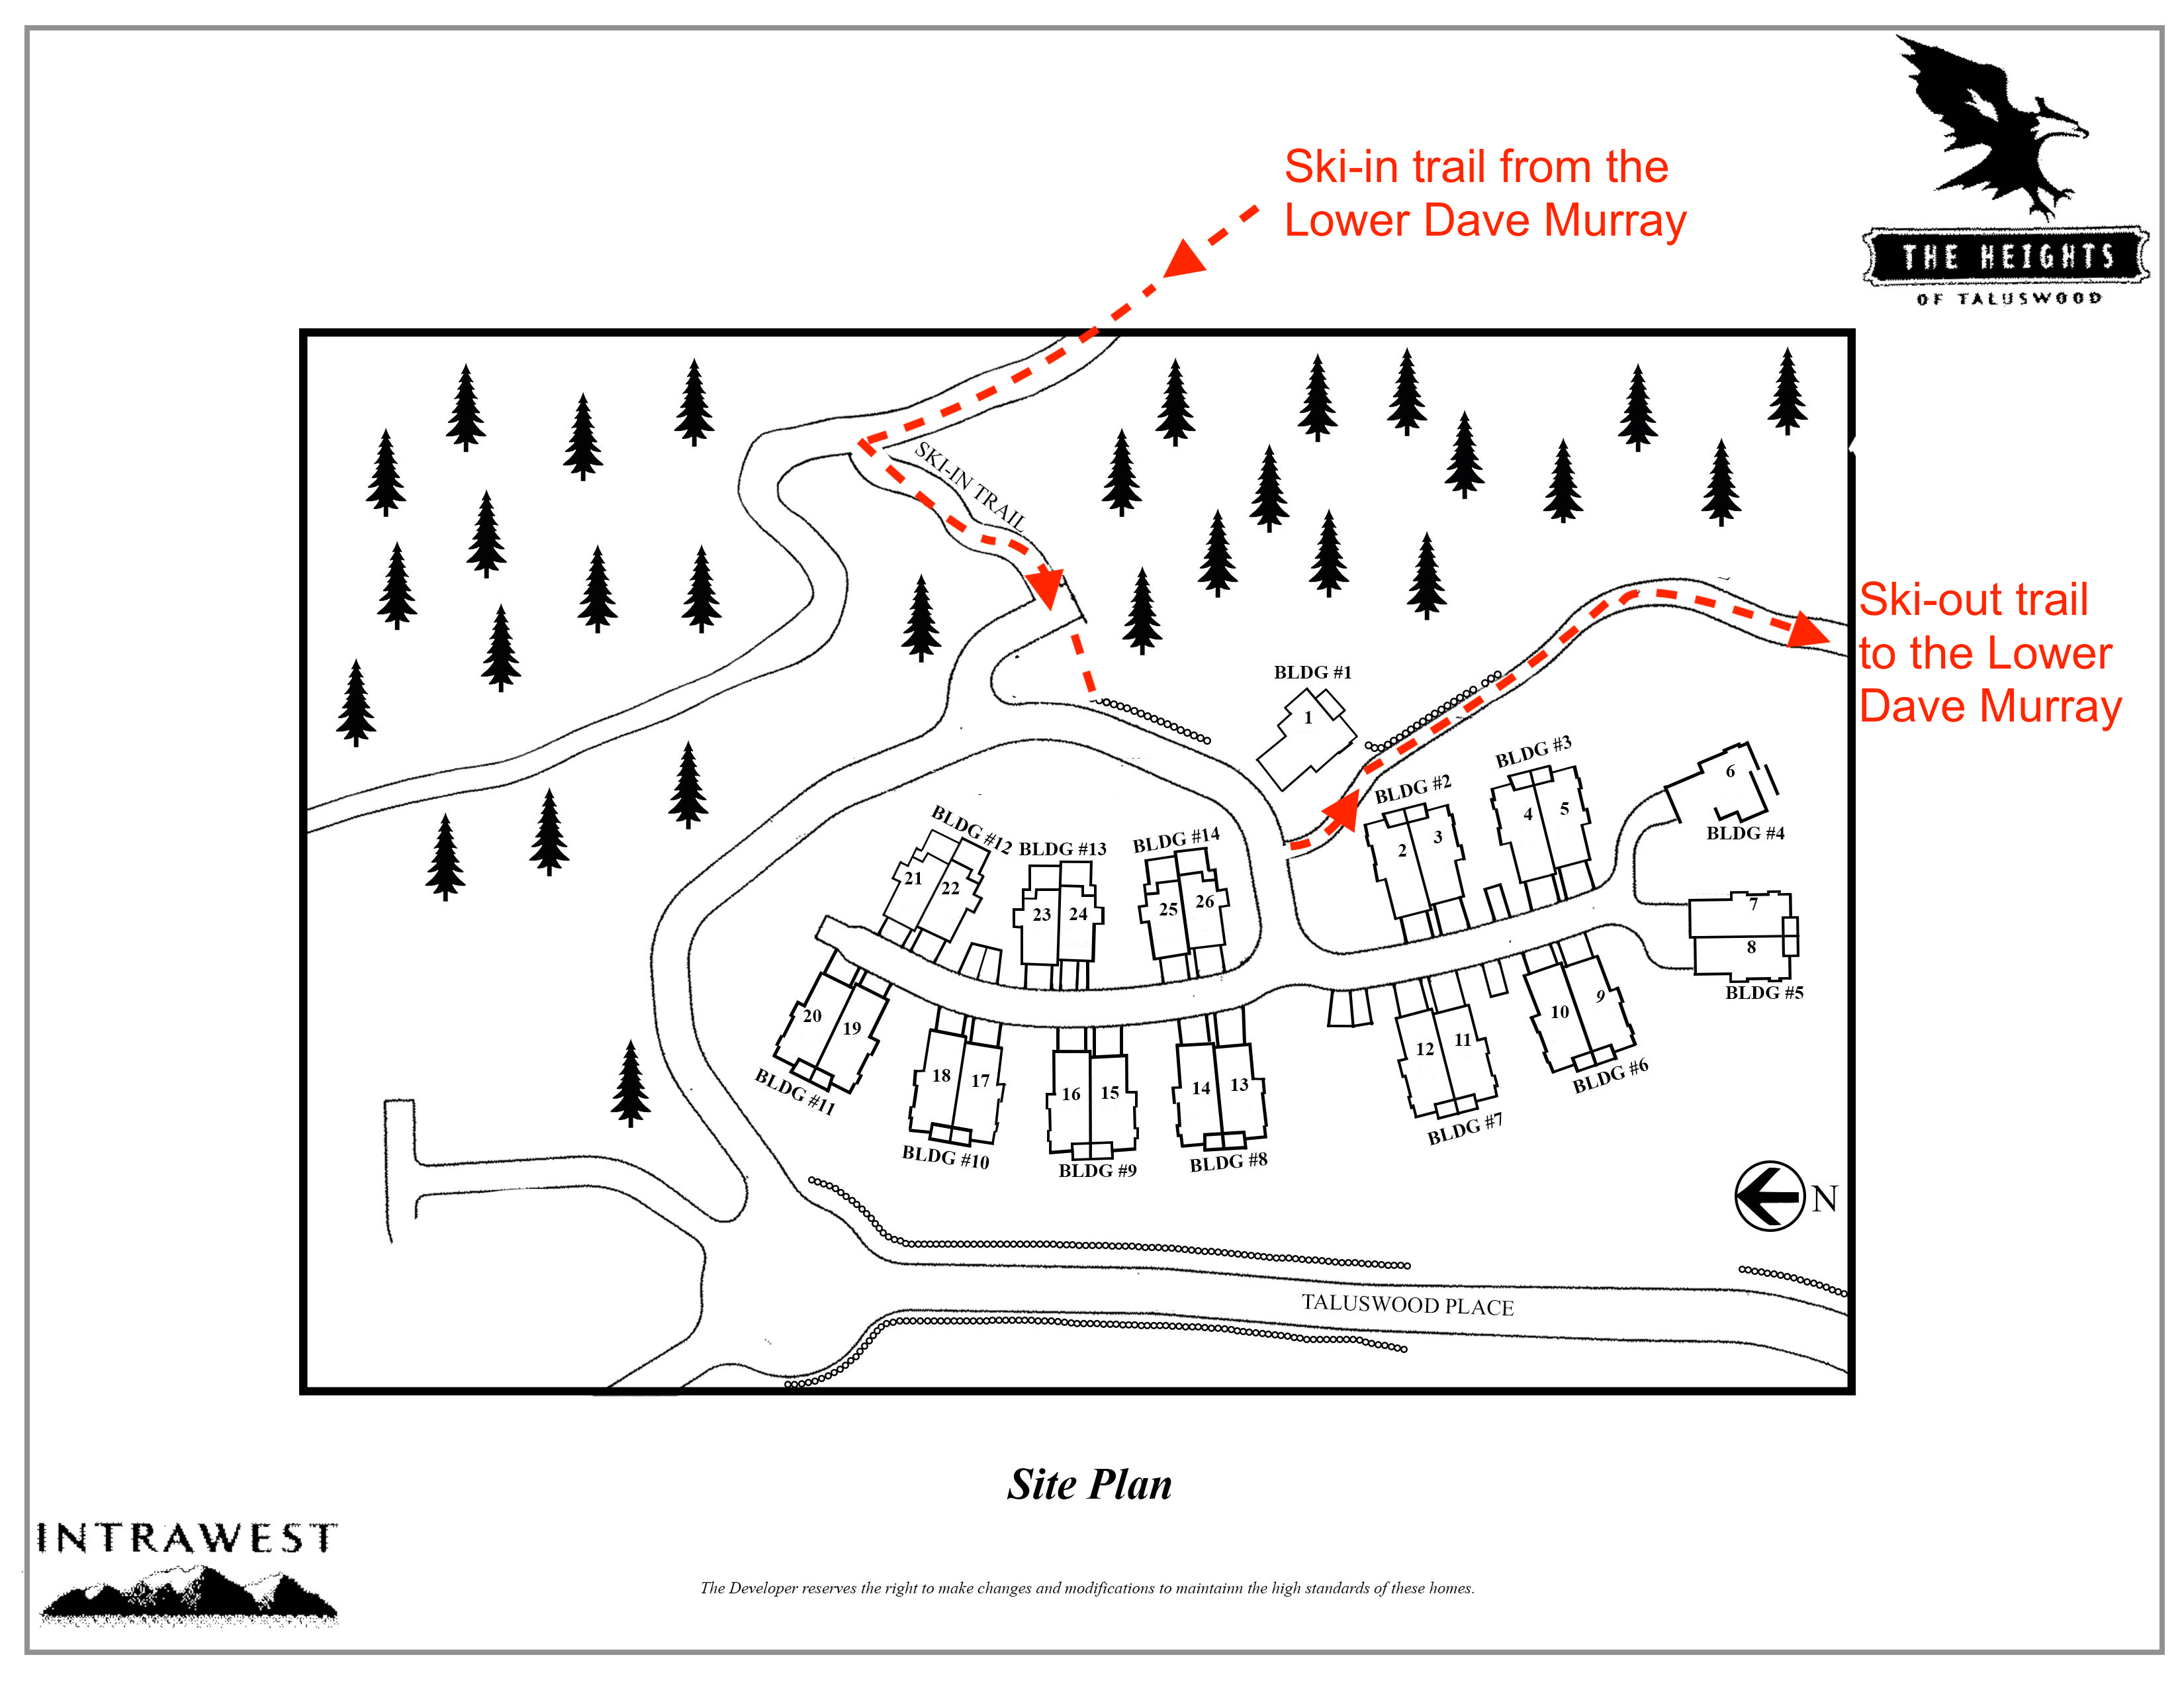 Heights site plan showing ski-in ski-out access trail